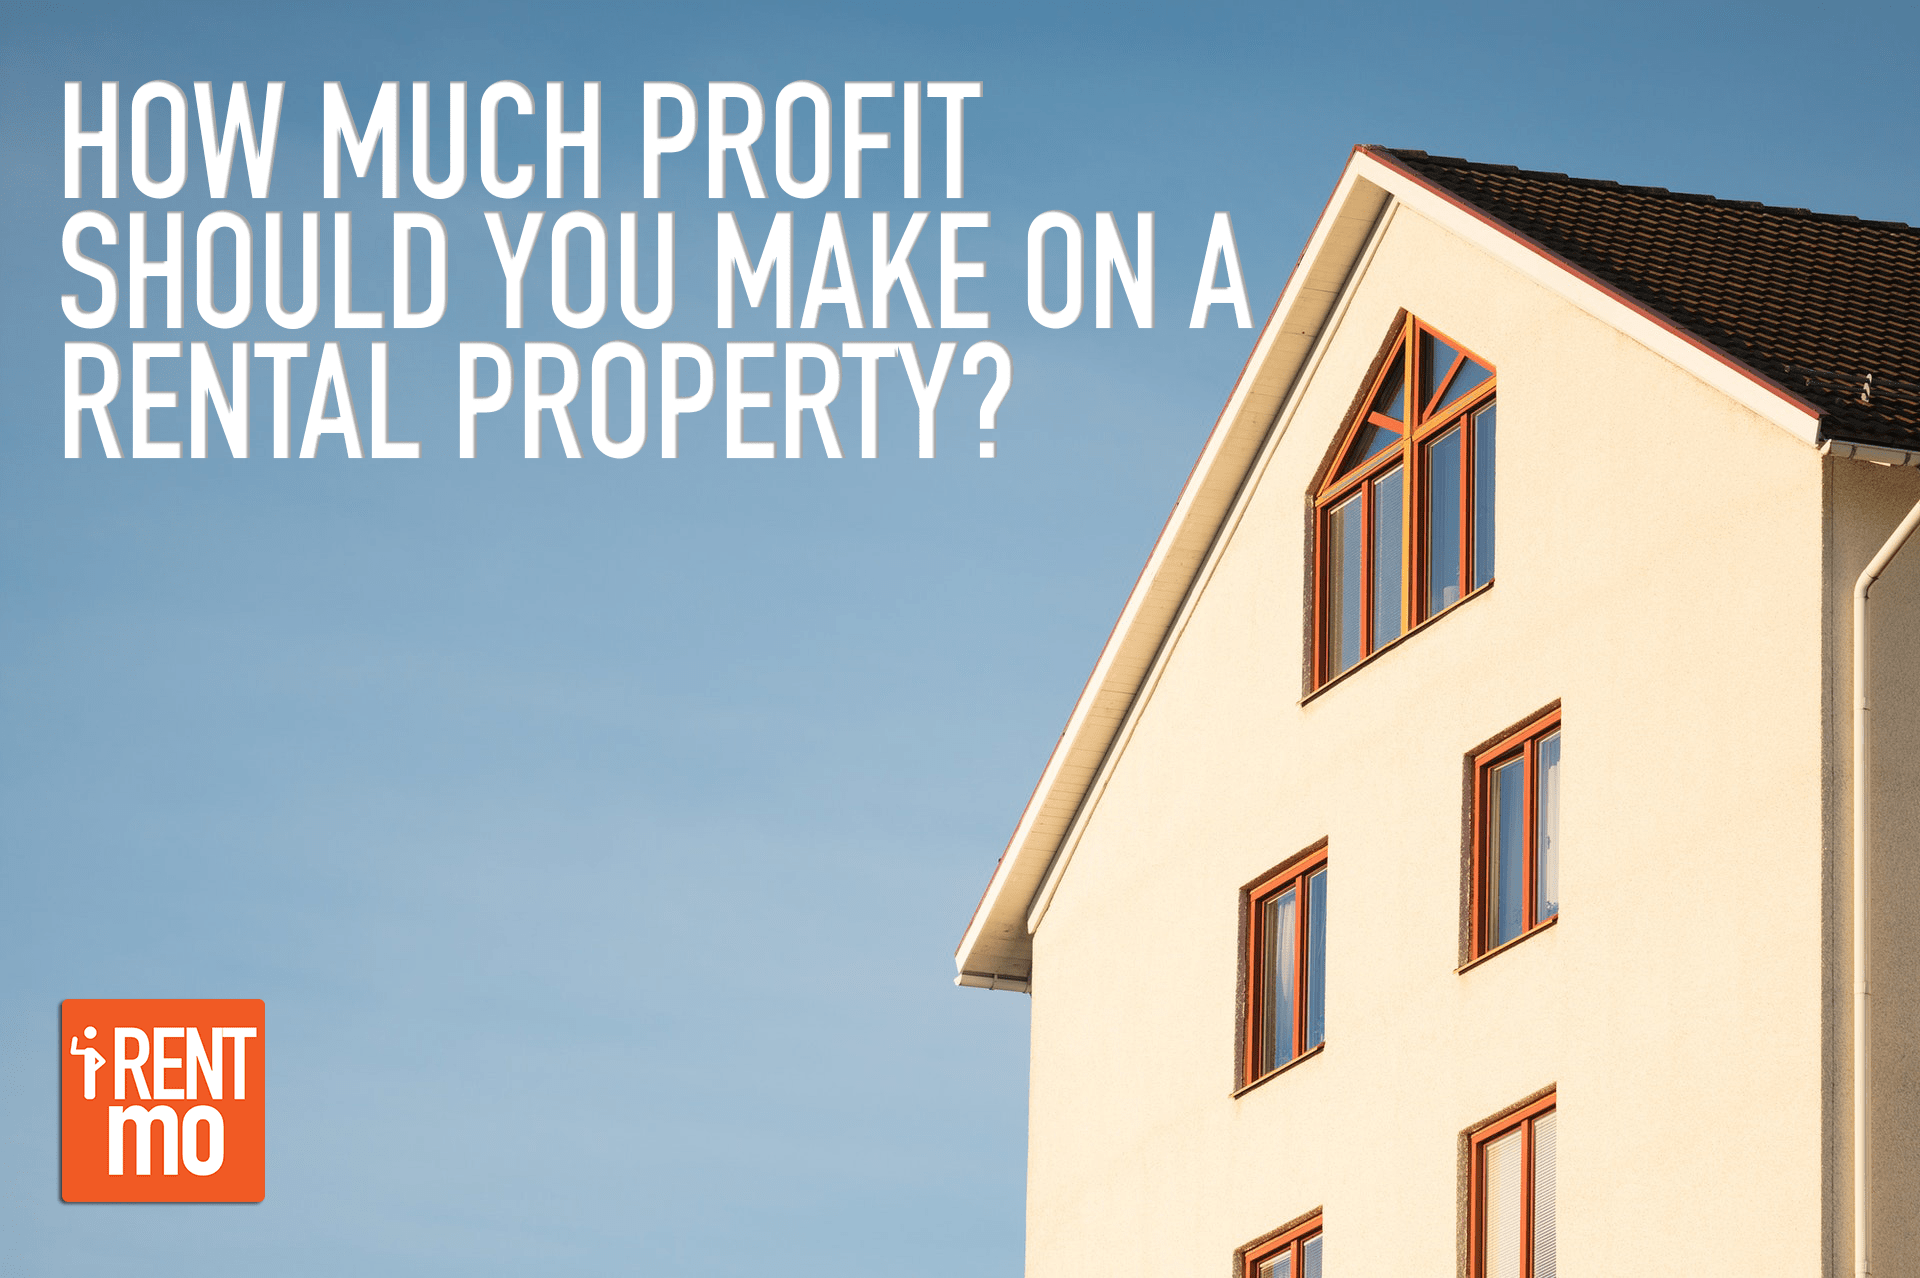 How Much Profit Should You Make on A Rental Property?